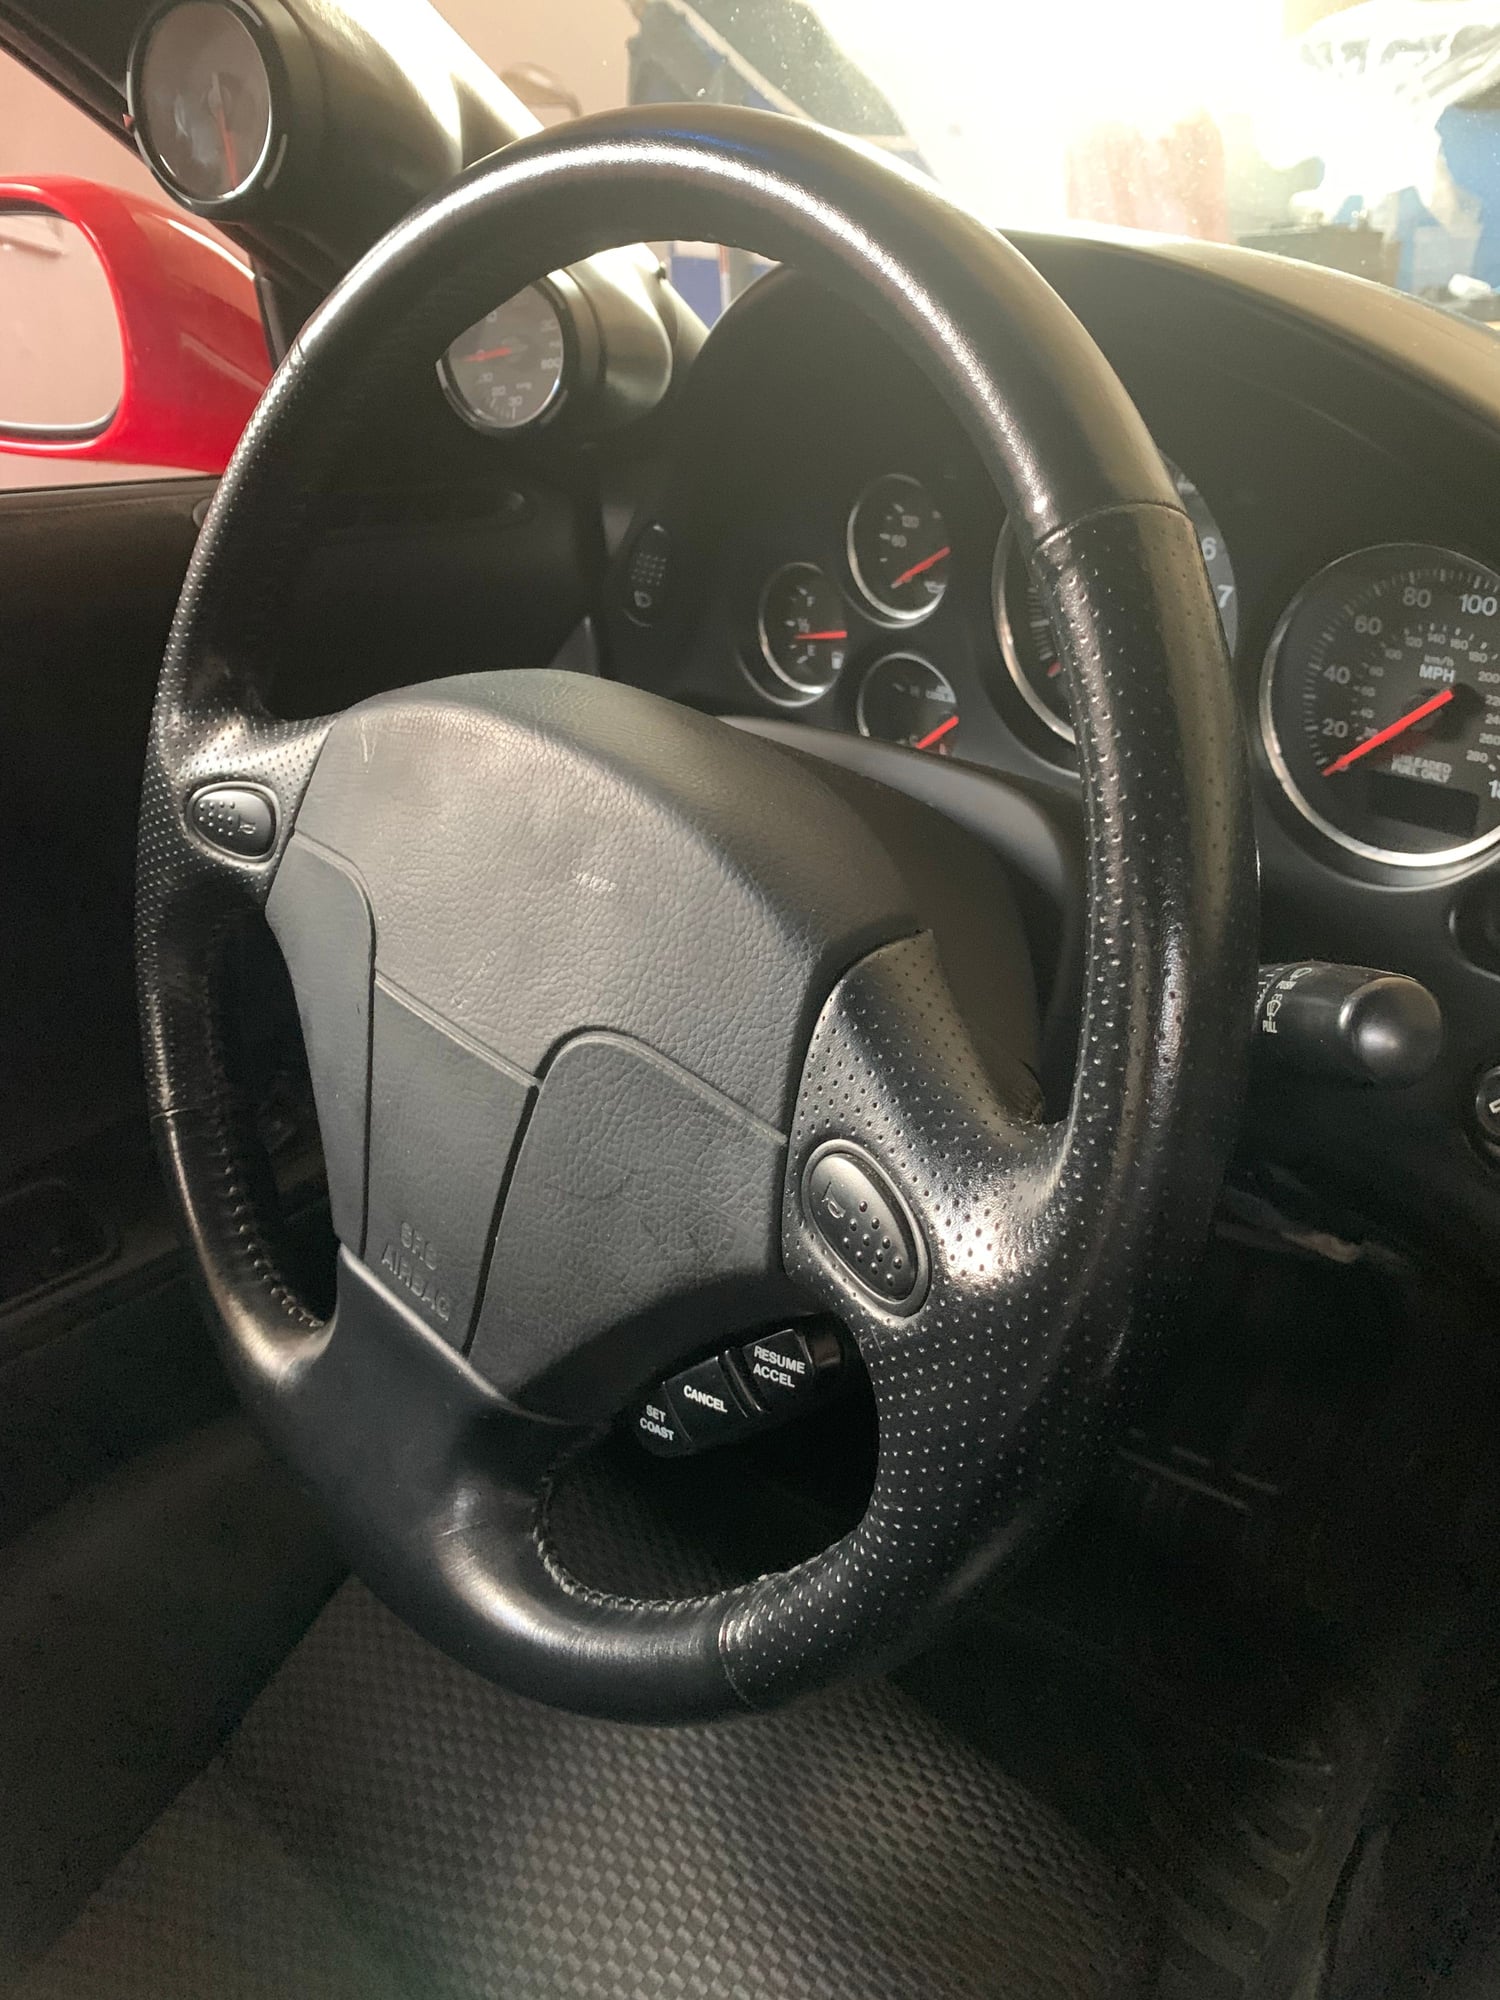 Interior/Upholstery - FD Steering wheel and airbag - Used - 1993 to 1995 Mazda RX-7 - Providence, RI 02860, United States